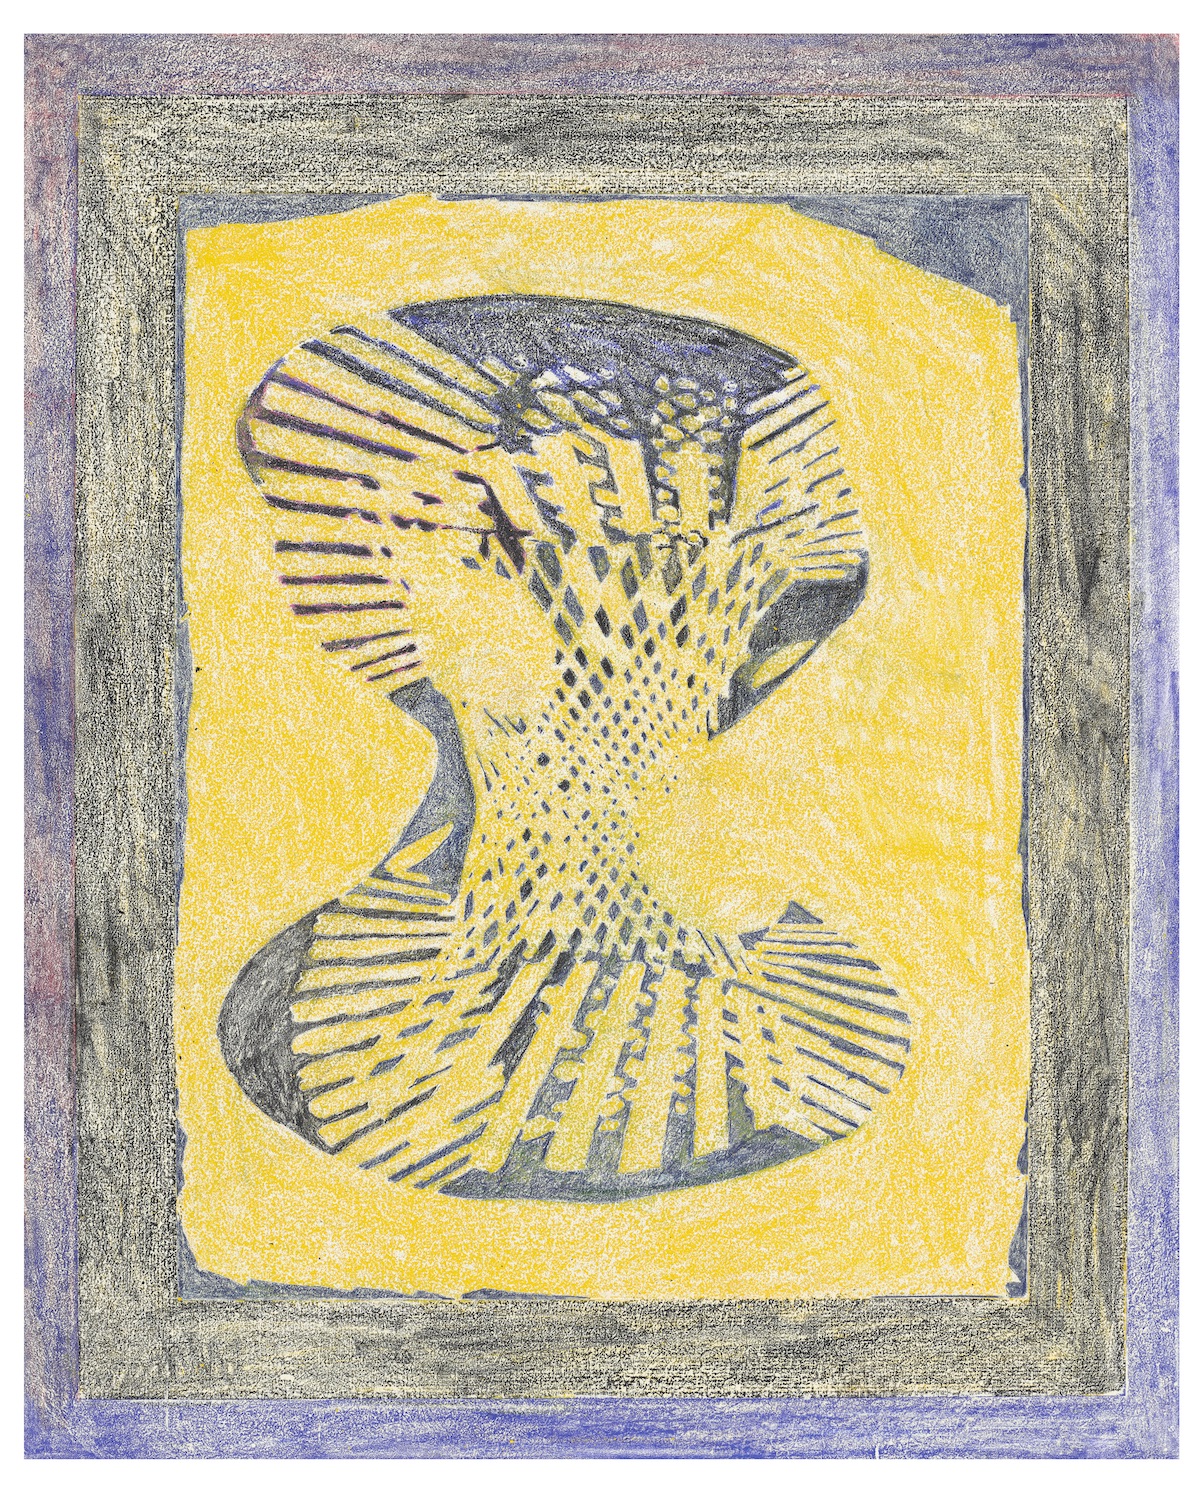 Terry Winters, Portrait 1/4, 2021, monoprint with additions in pencil, crayon, and oil, 46 7/8 x 38 3/4".